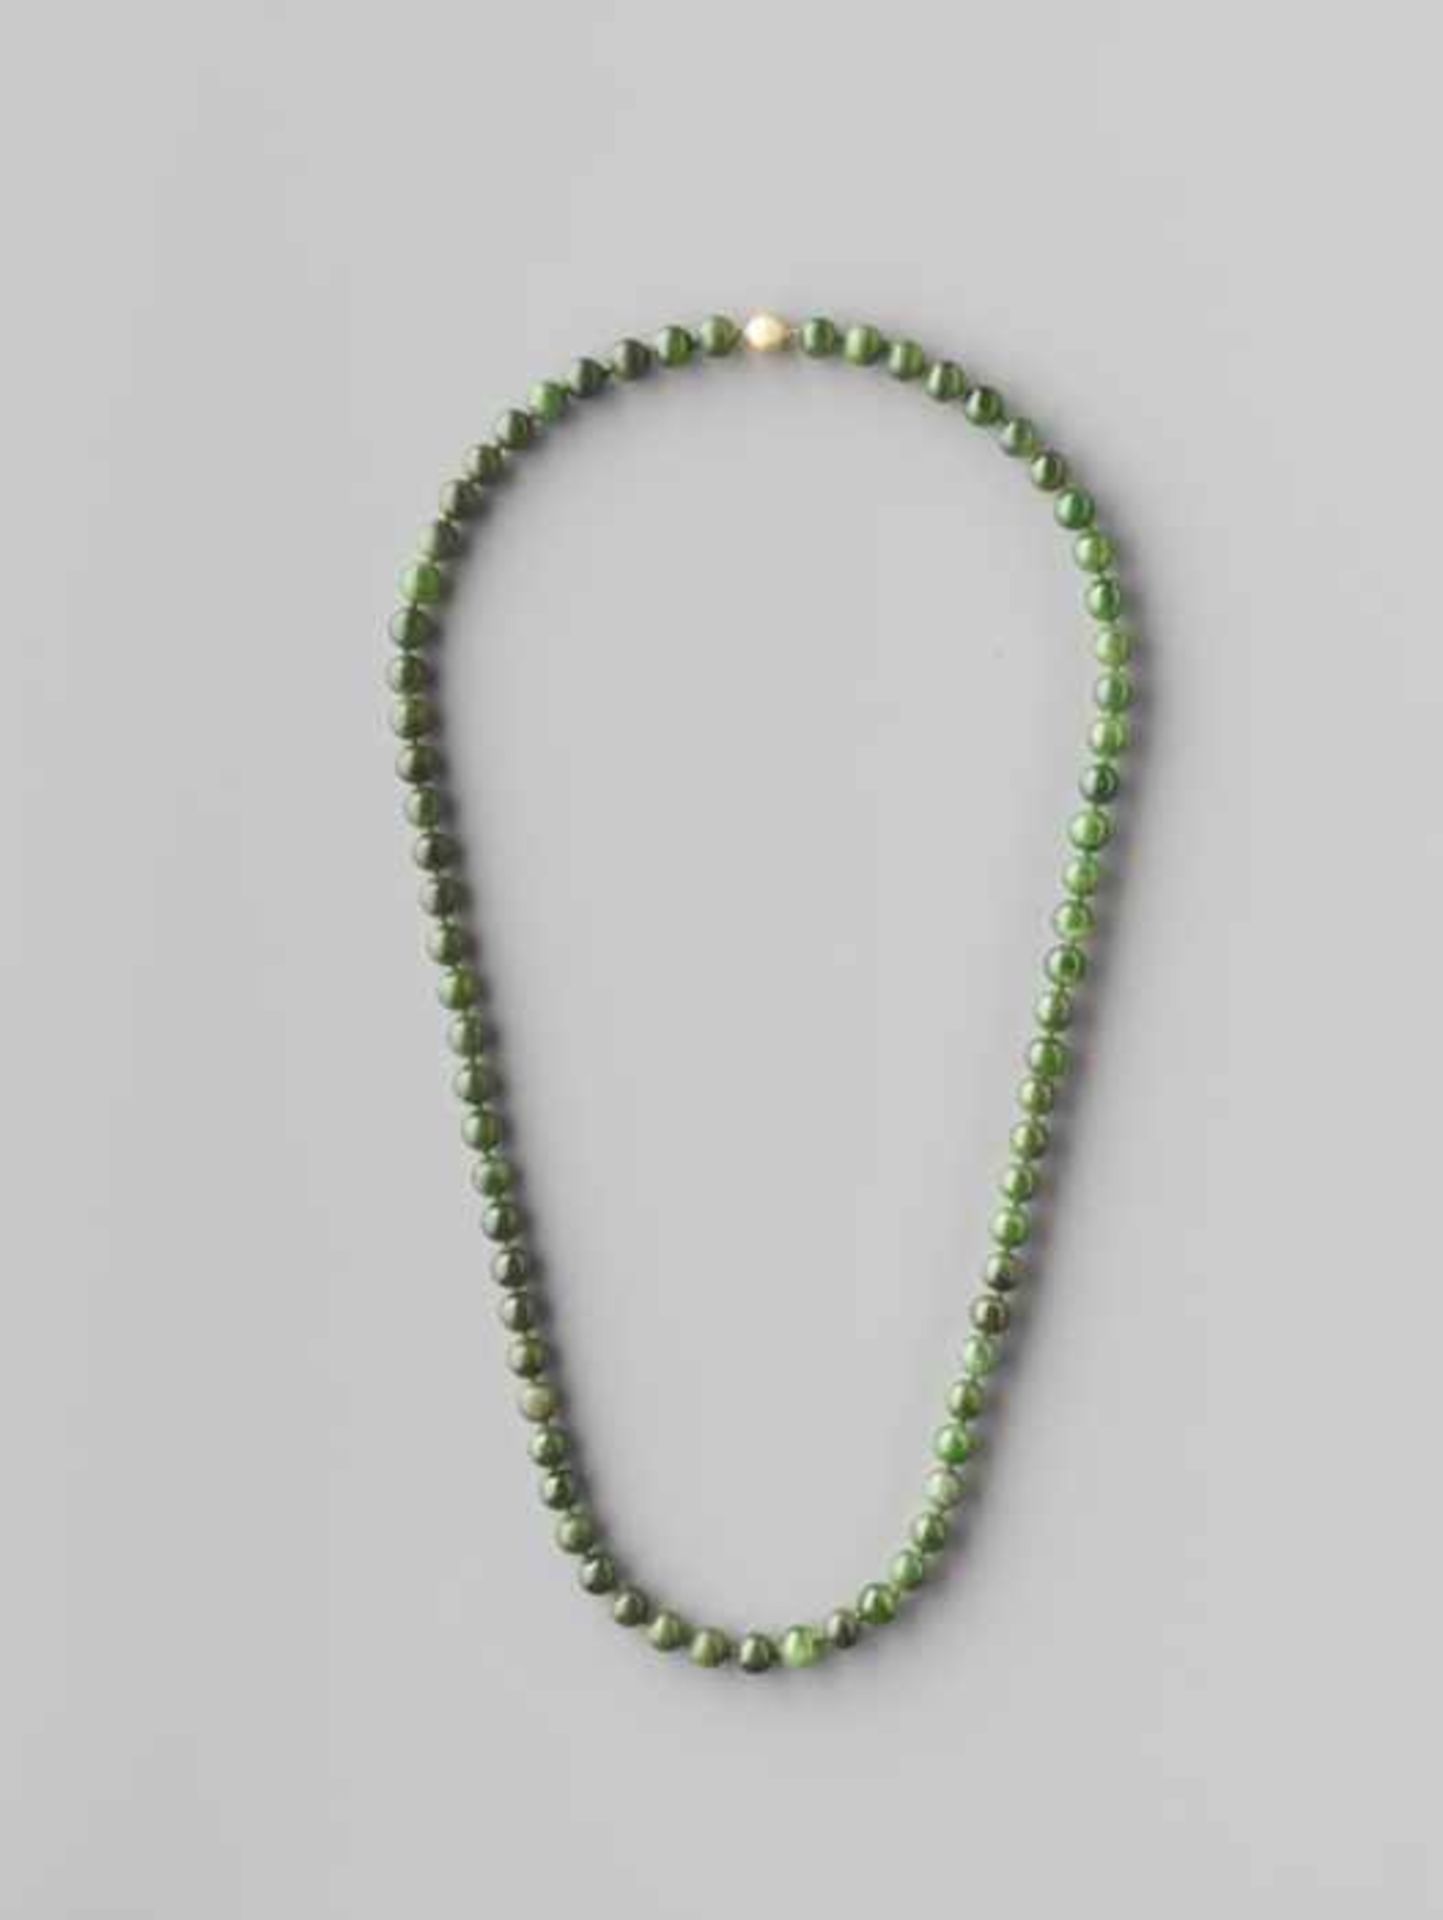 A SPINACH GREEN NEPHRITE BEAD NECKLACE, 71 BEADS, LATE QING DYNASTY Certified natural dark and - Image 3 of 5